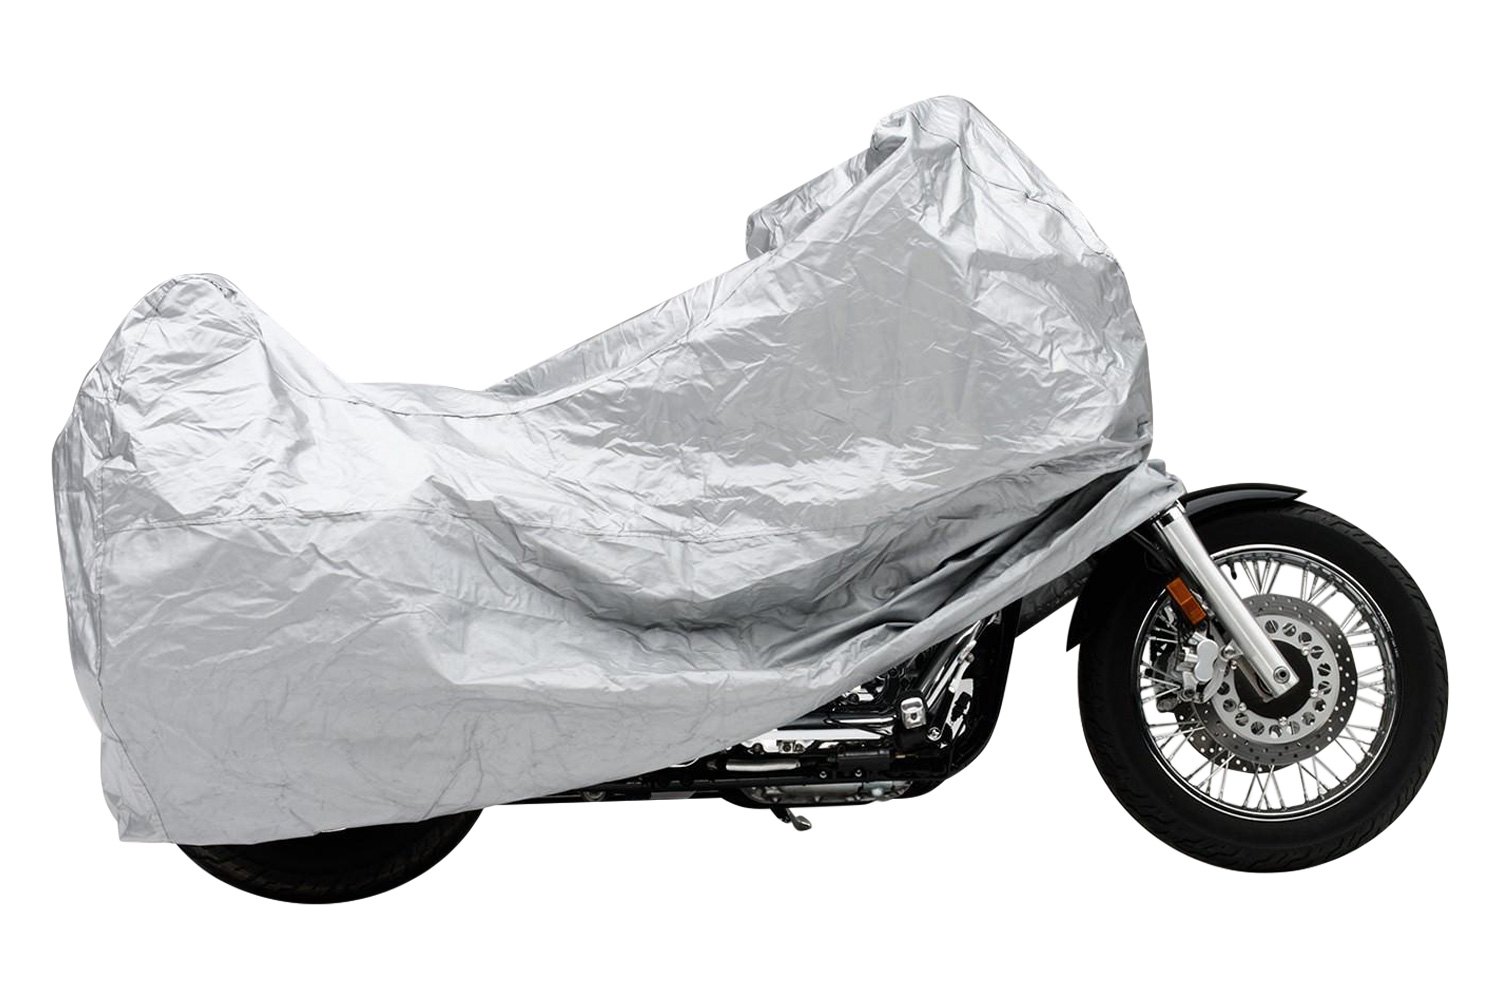 Covercraft® Ready-Fit™ Deluxe Silver Motorcycle Cover